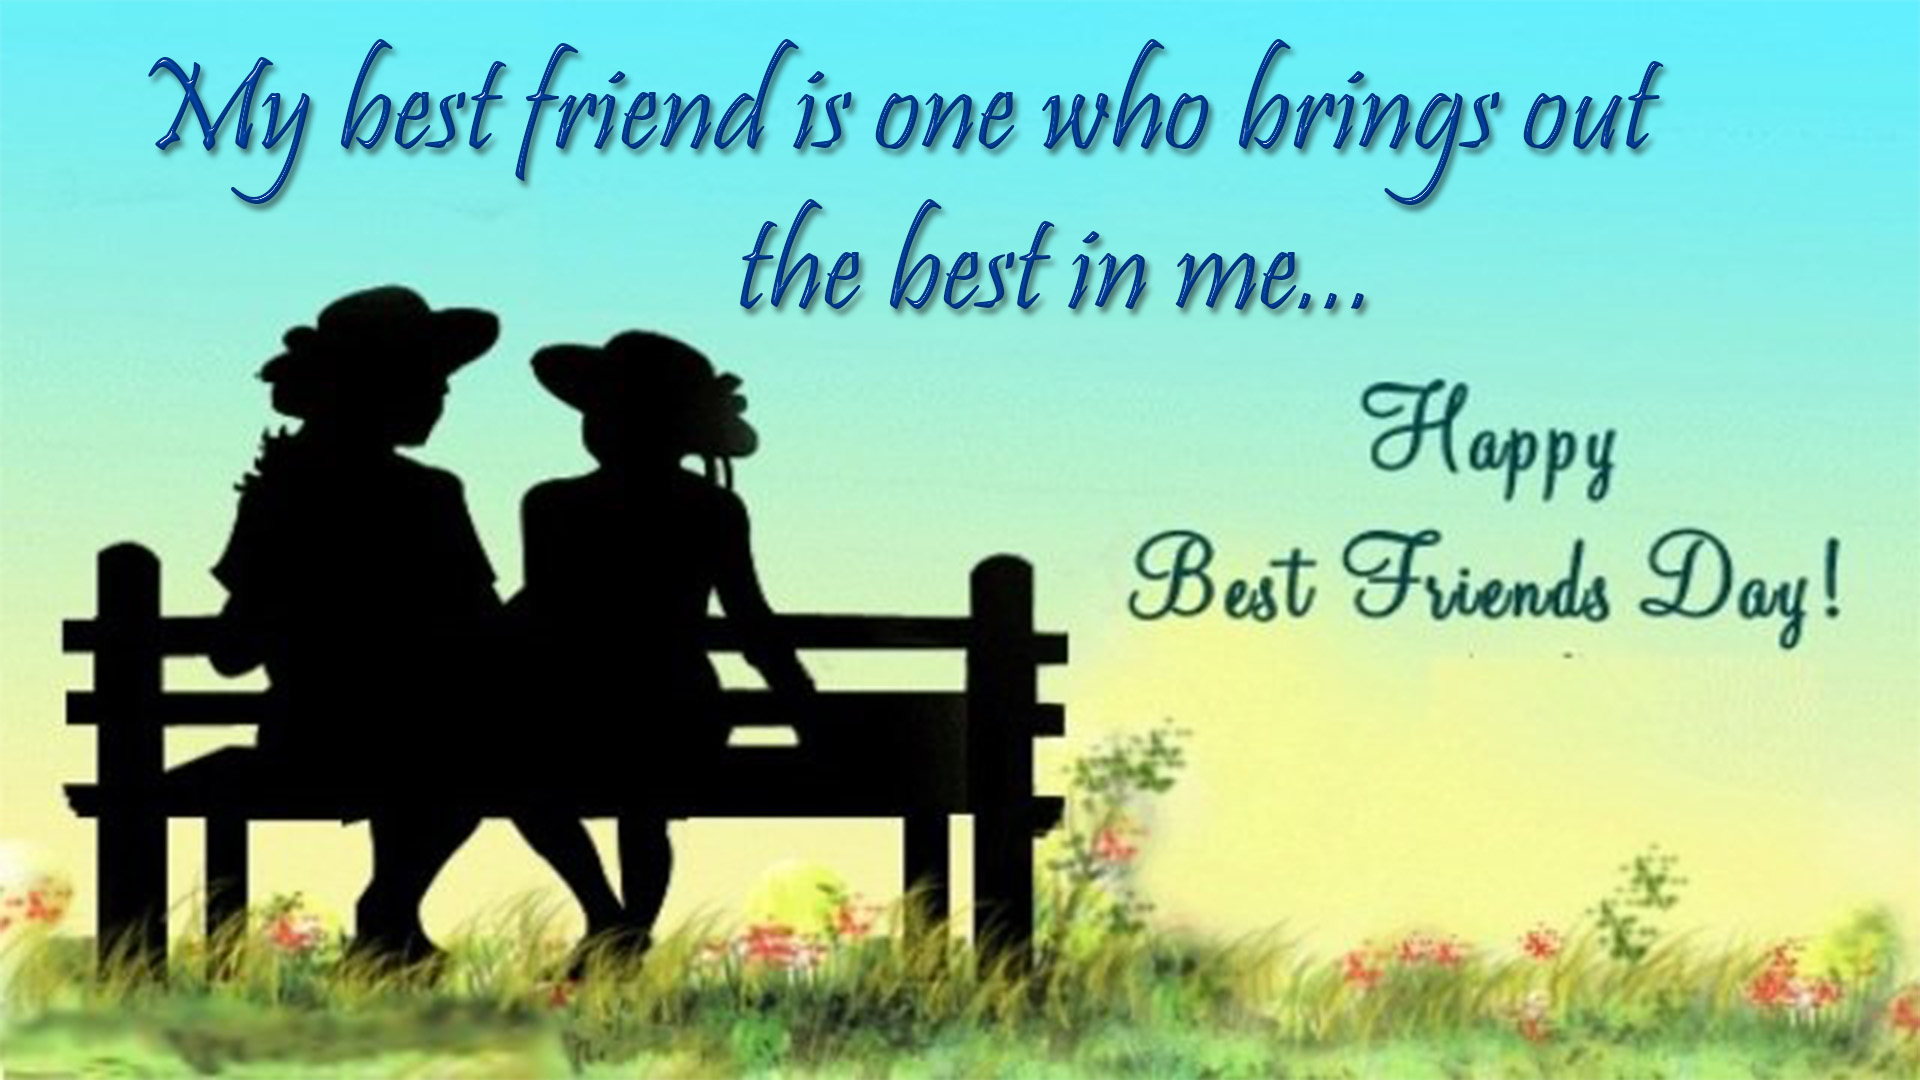 Those that the day my friend. Best friends статус. Best friends. For friends Графика. Greetings about Friendship.